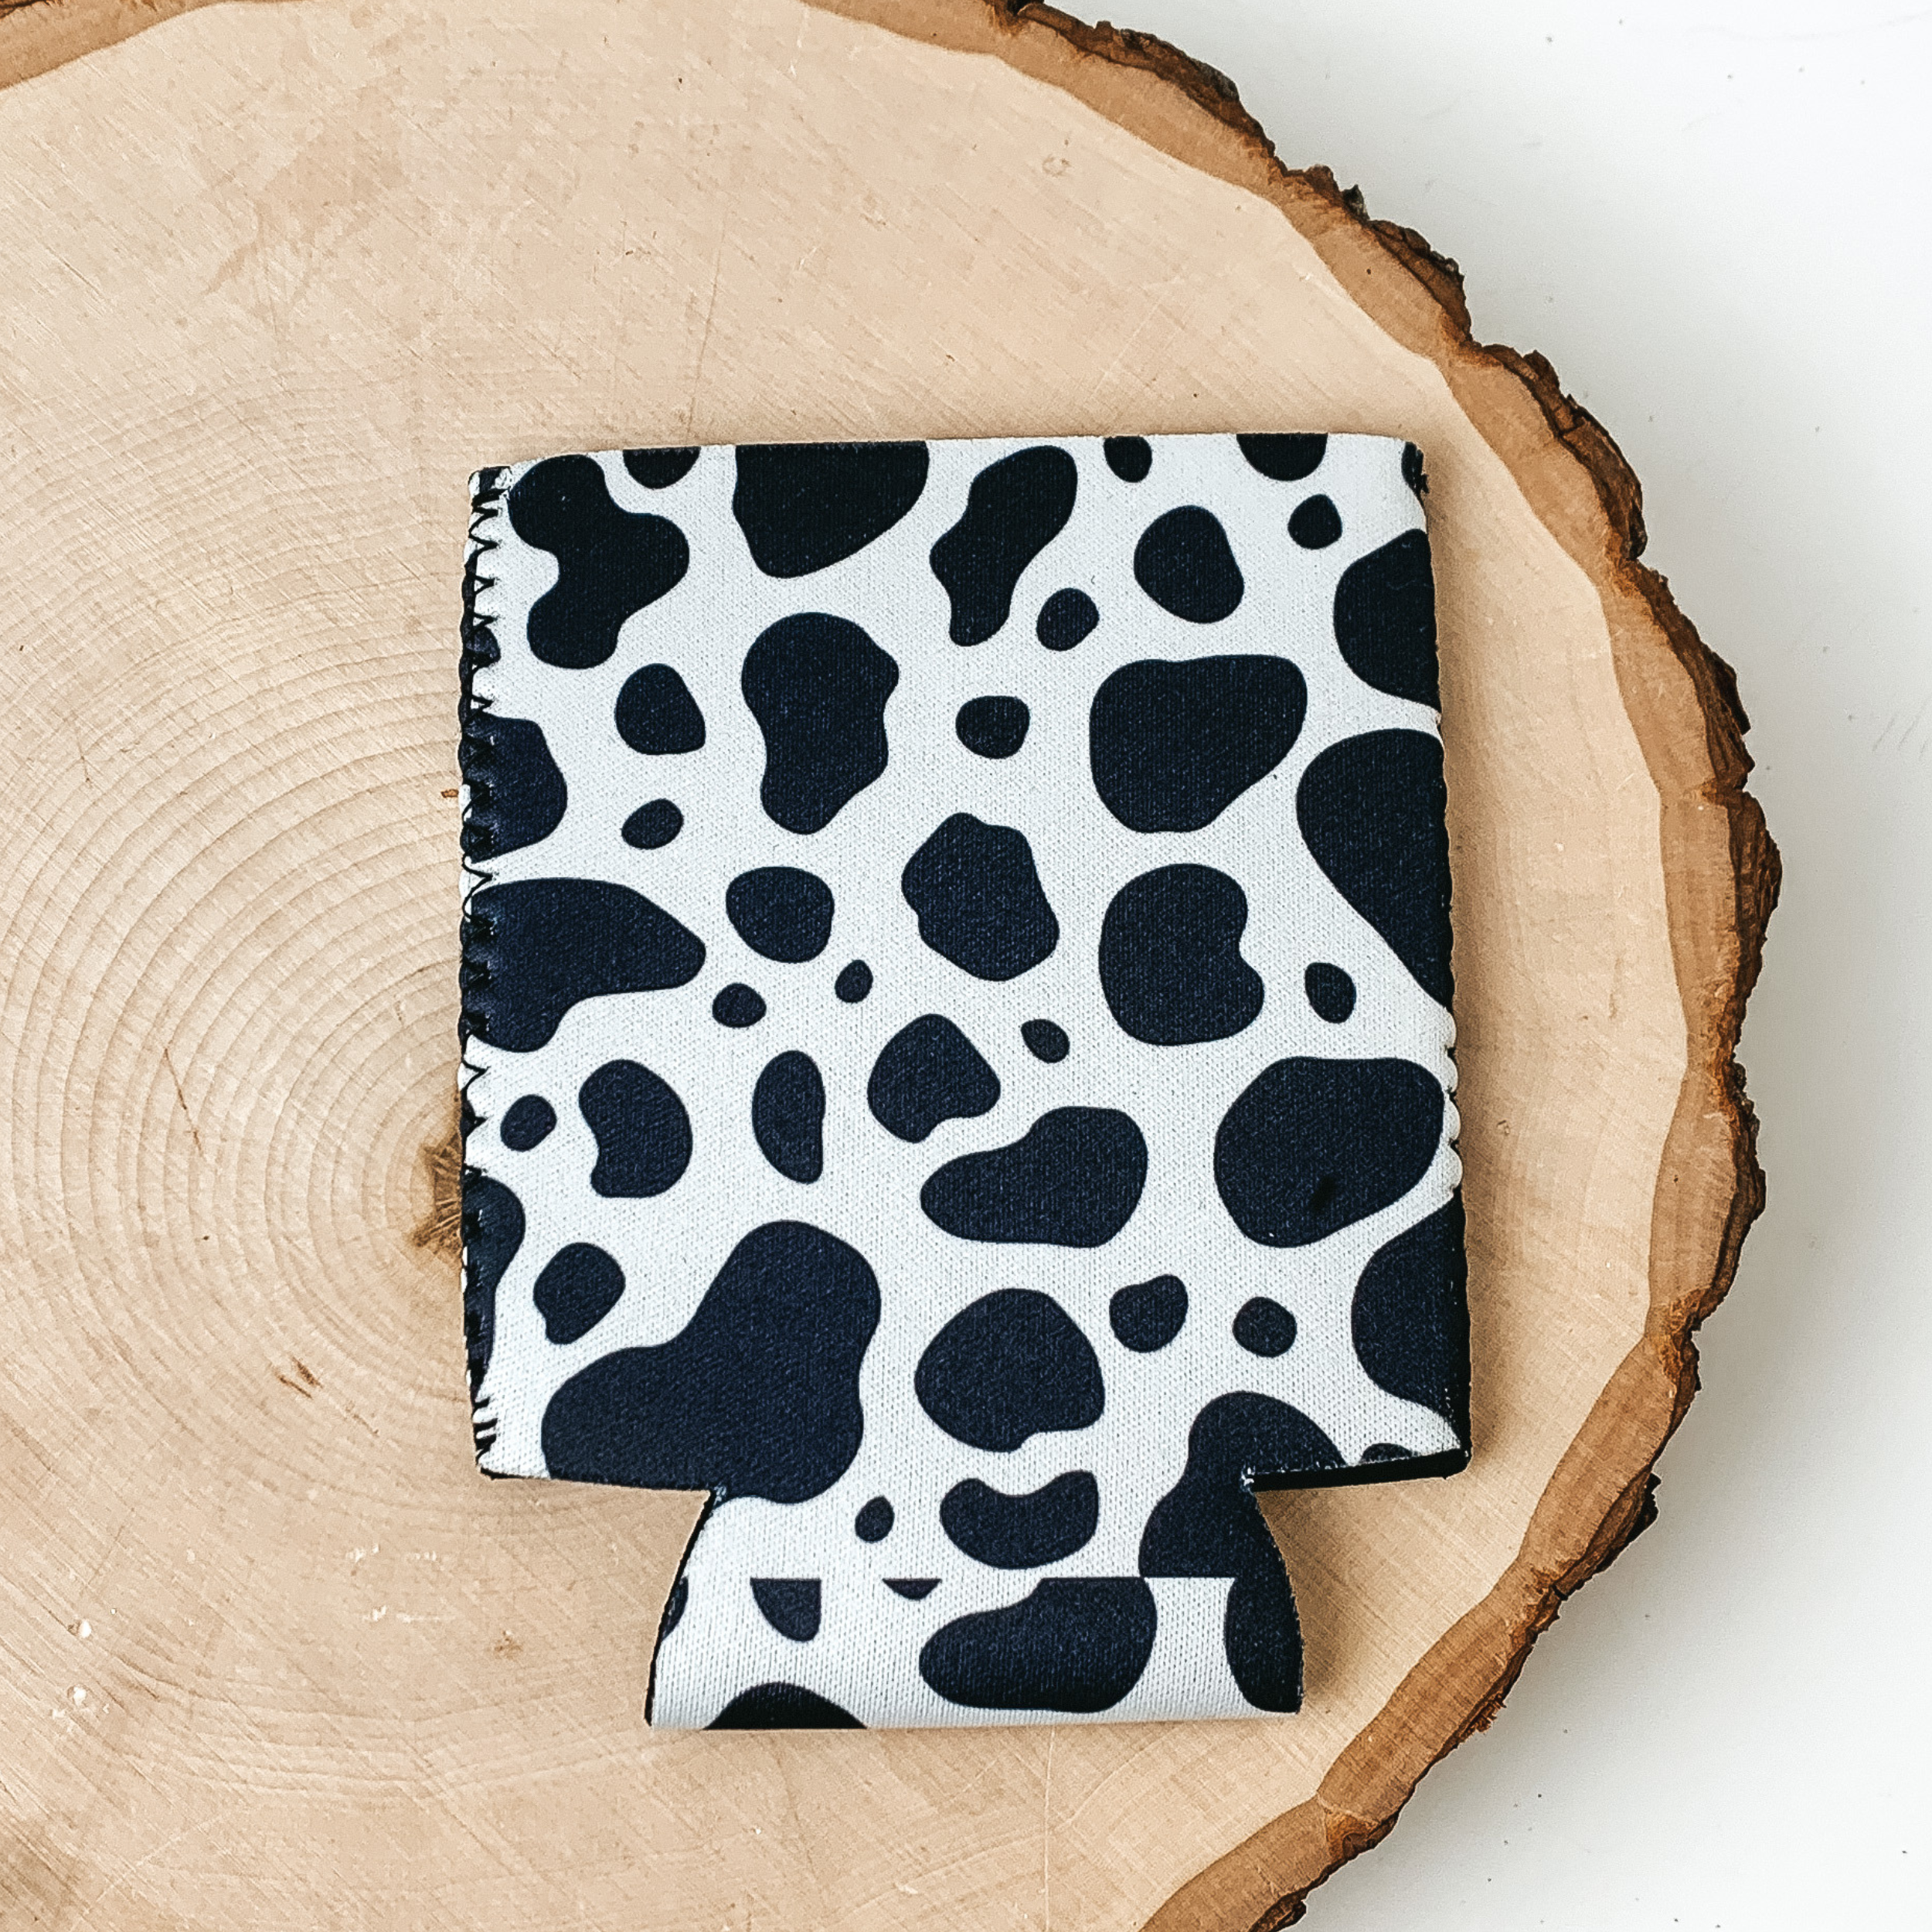 This Black and White cow print kooozie is pictured on a peice of wood, with a white background.  